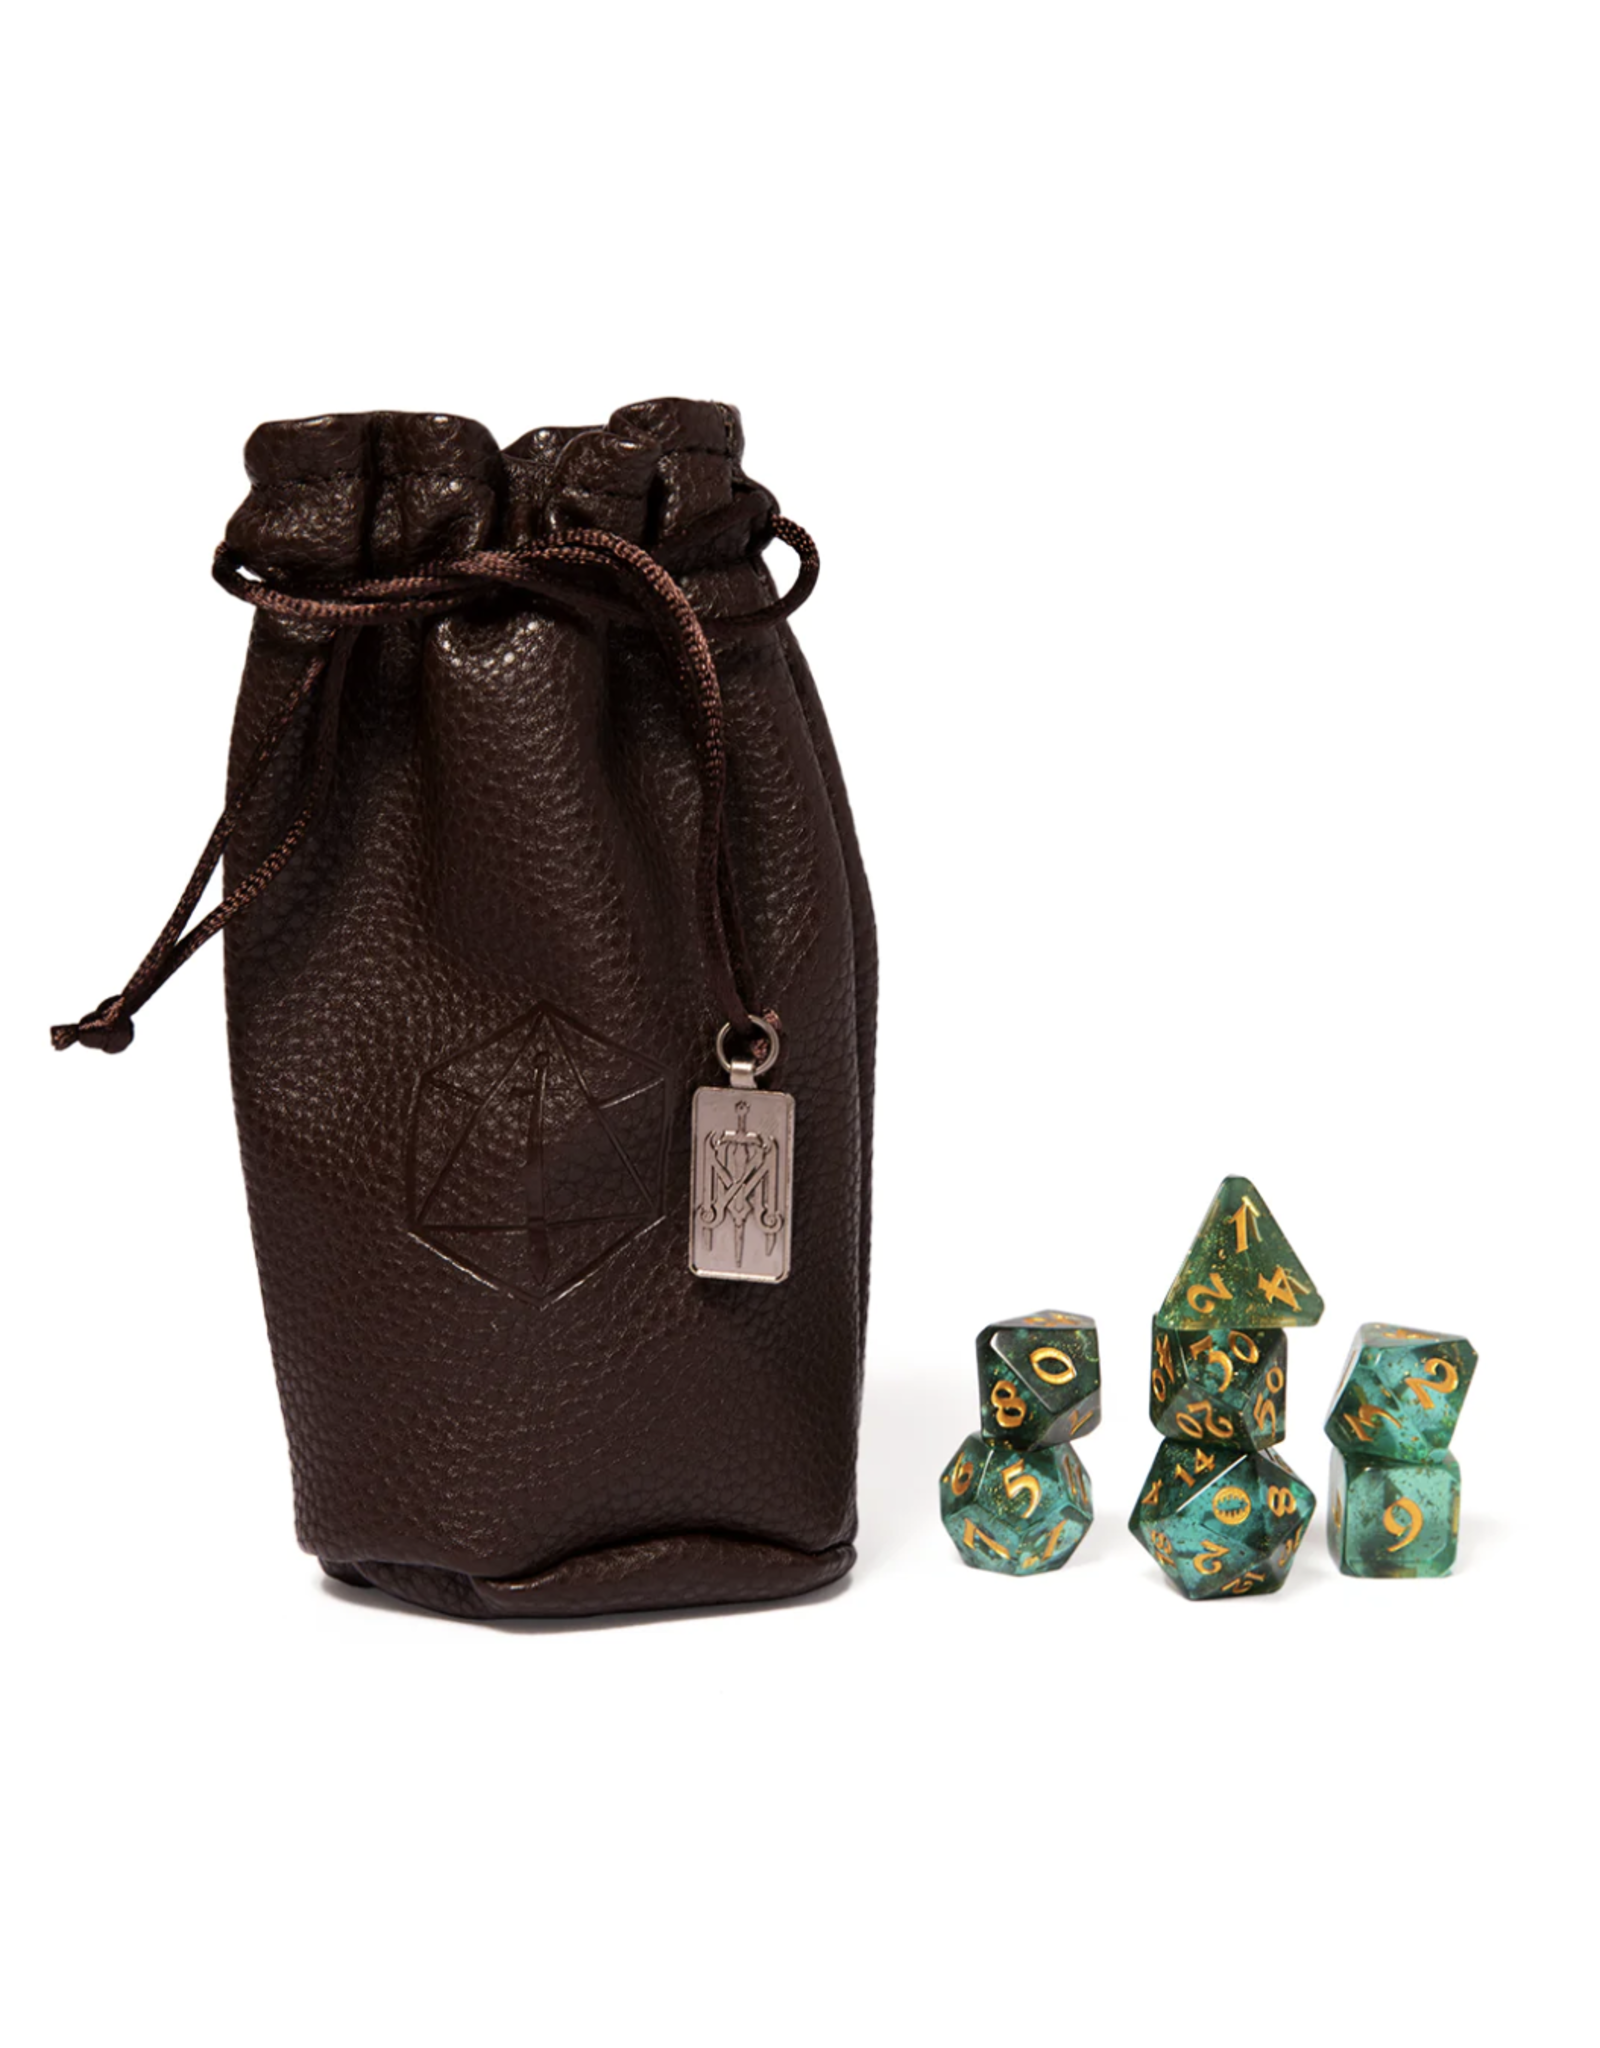 Critical Role Mighty Nein Dice Set: Fjord Stone